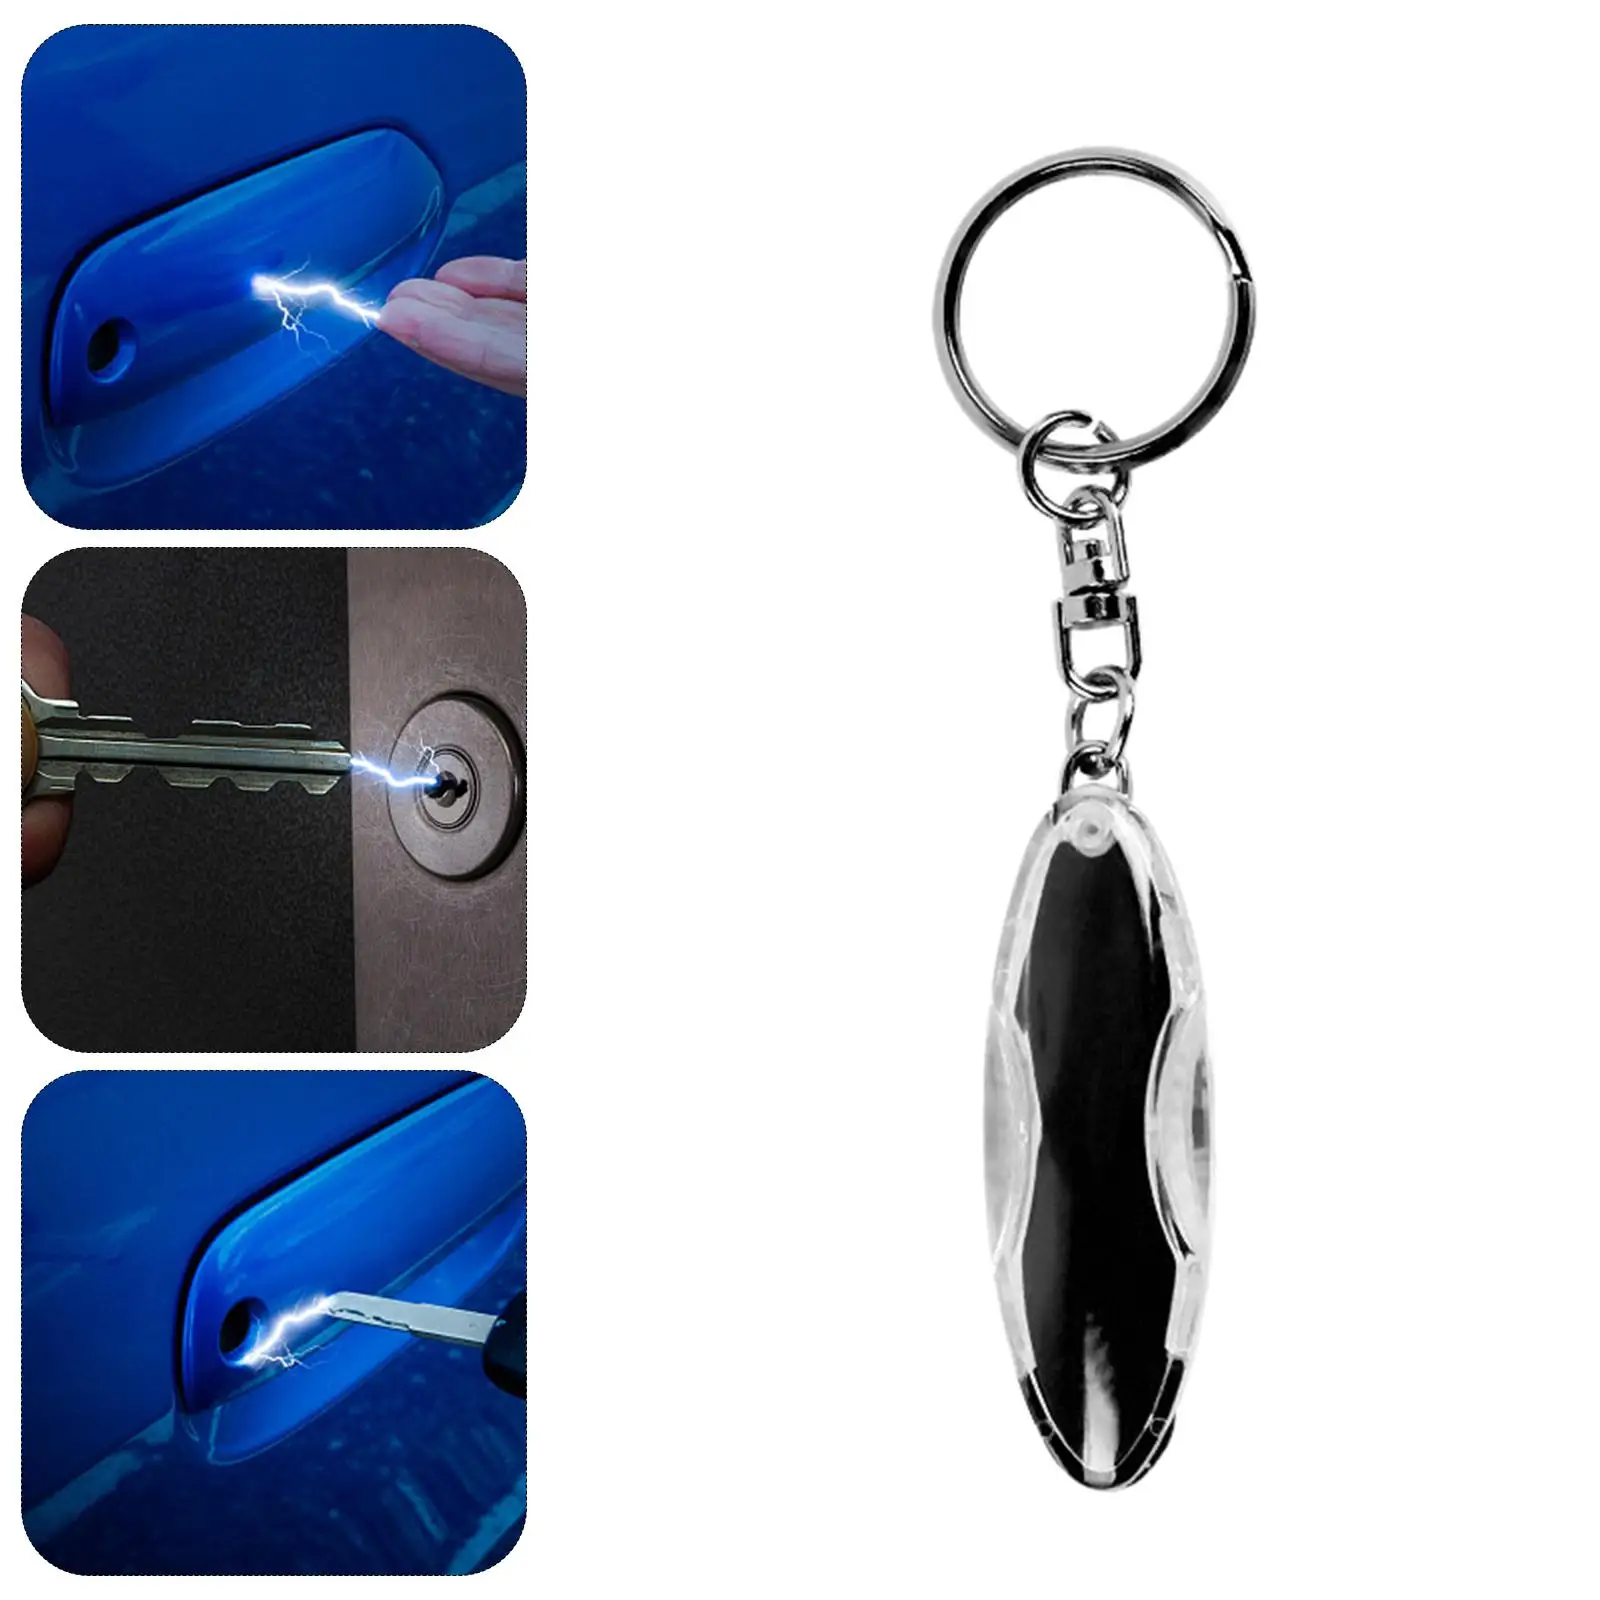 Portable Anti Static Keychain, Keyring Static Shock Resin Conductive Tool Best